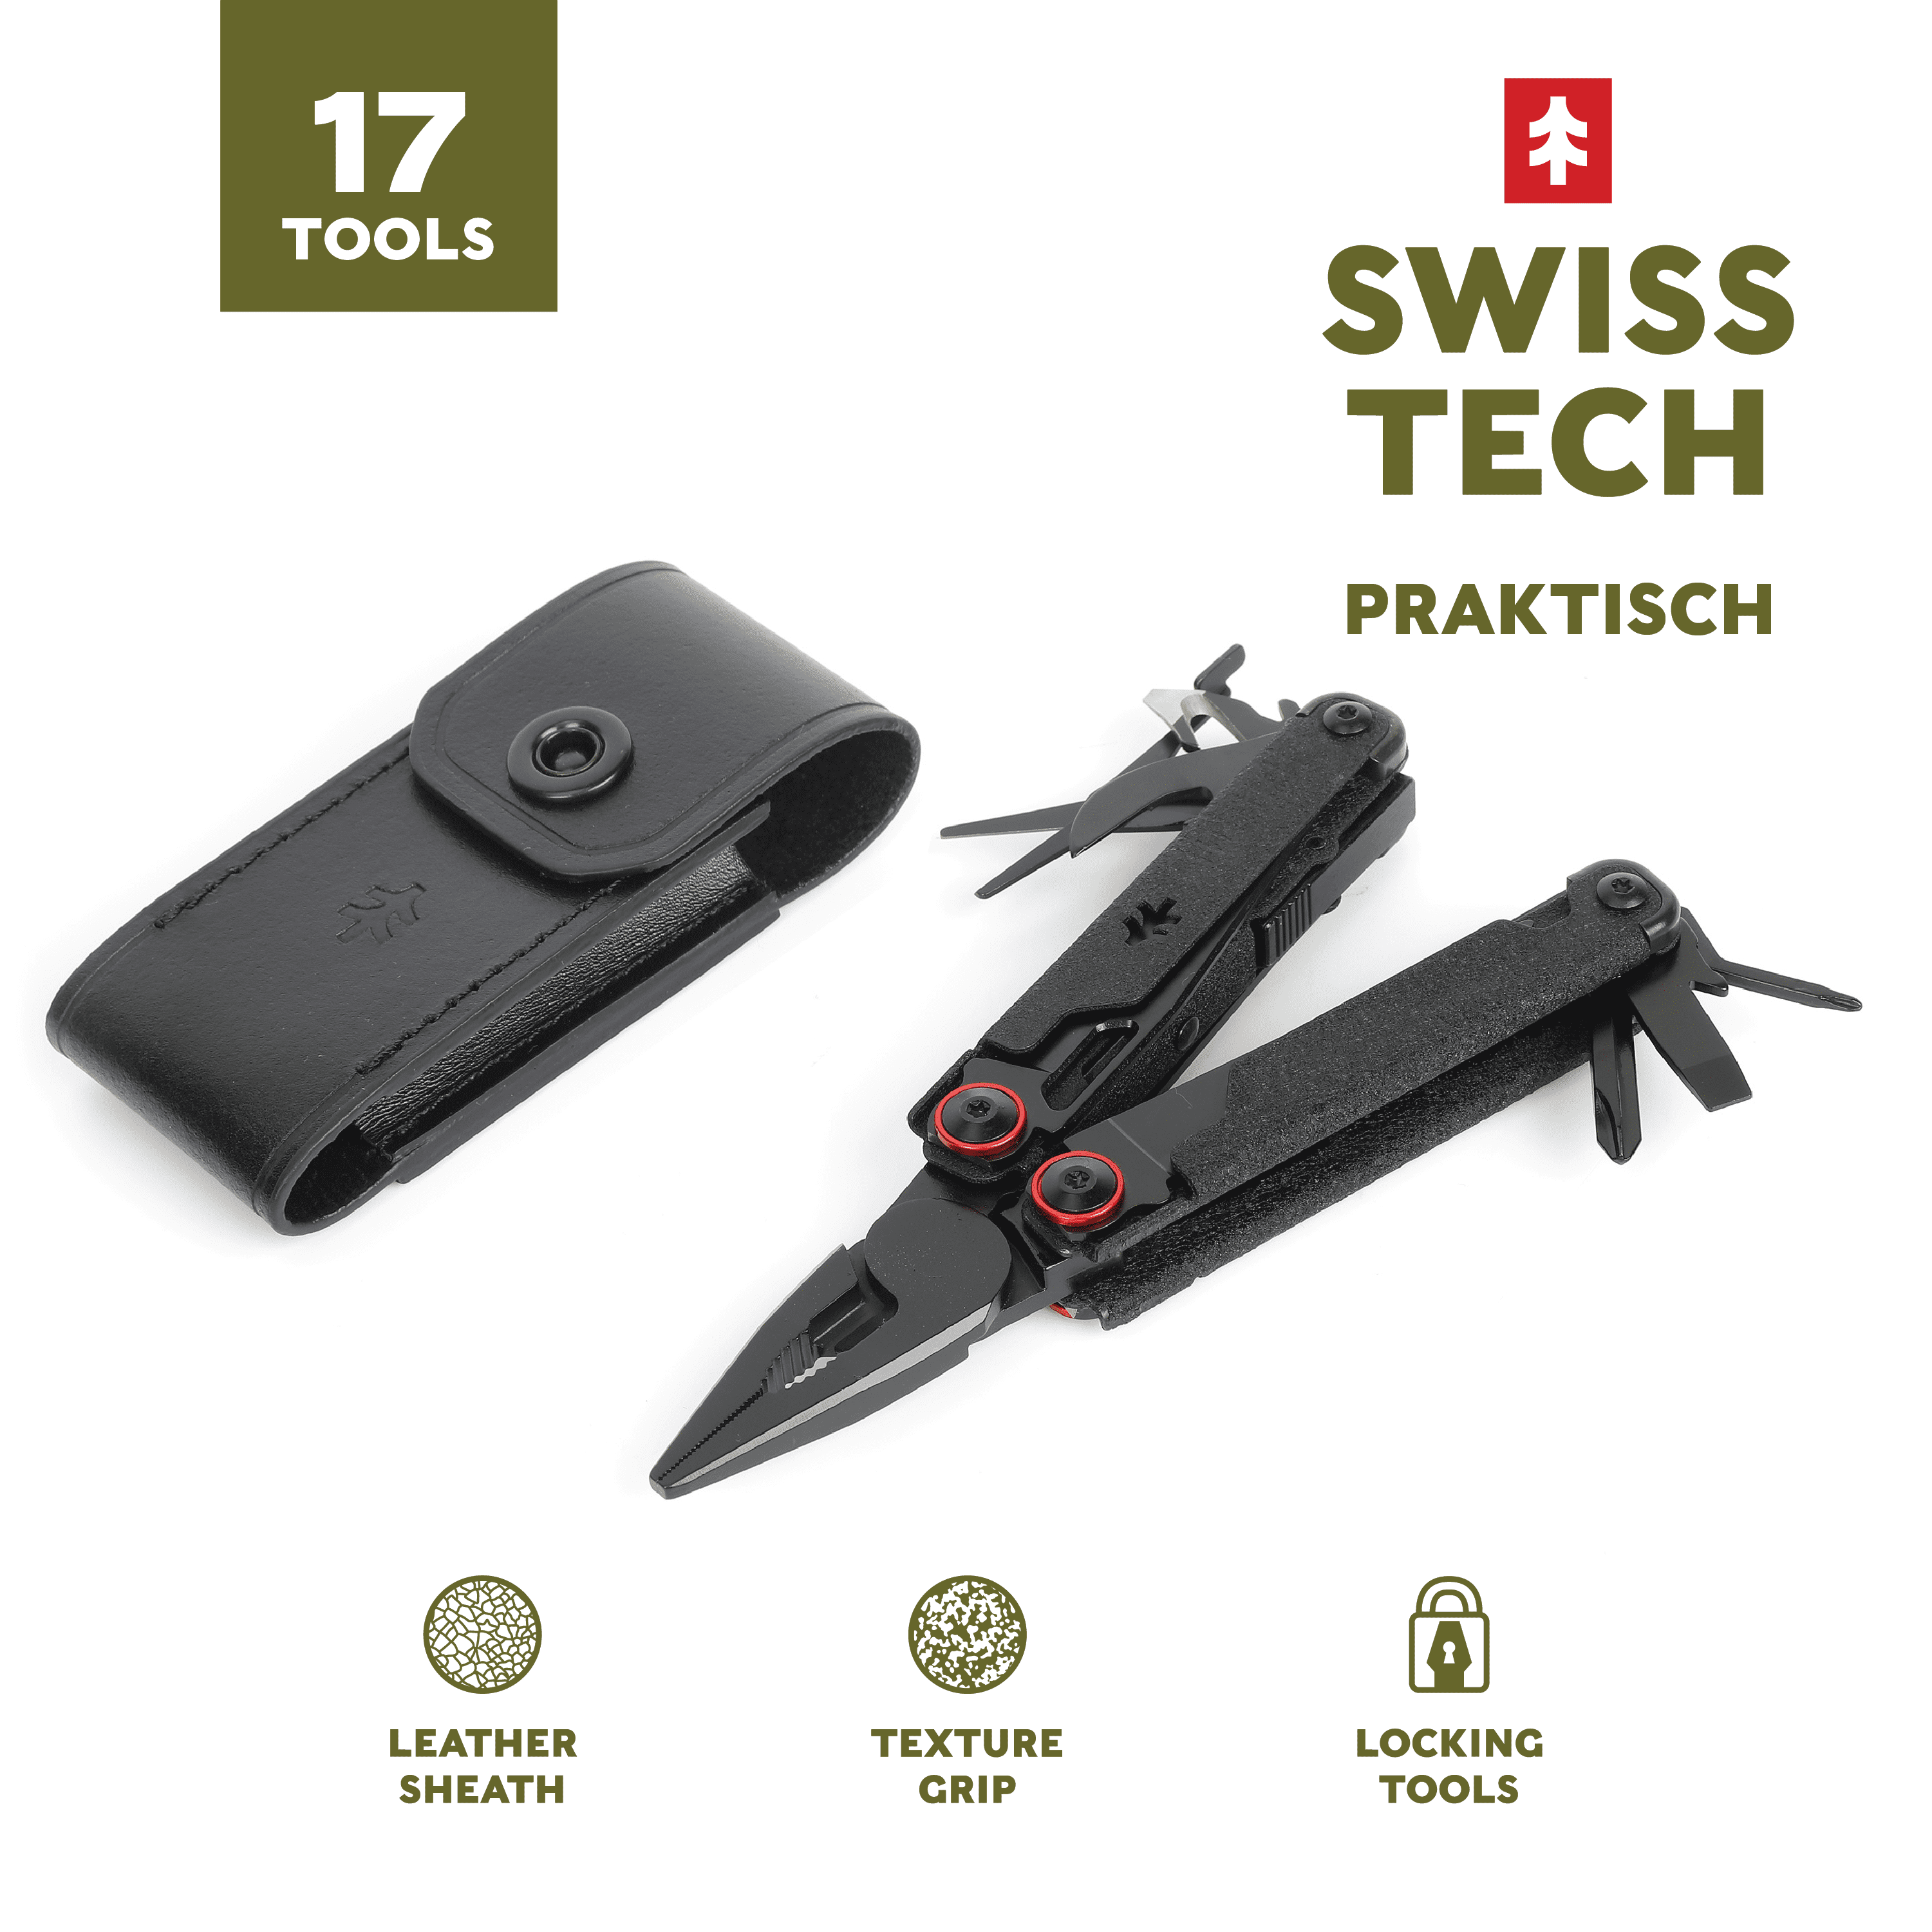 Swiss Tech Aus-8 Steel 17-in-1 Folding Multi Tool with Leather